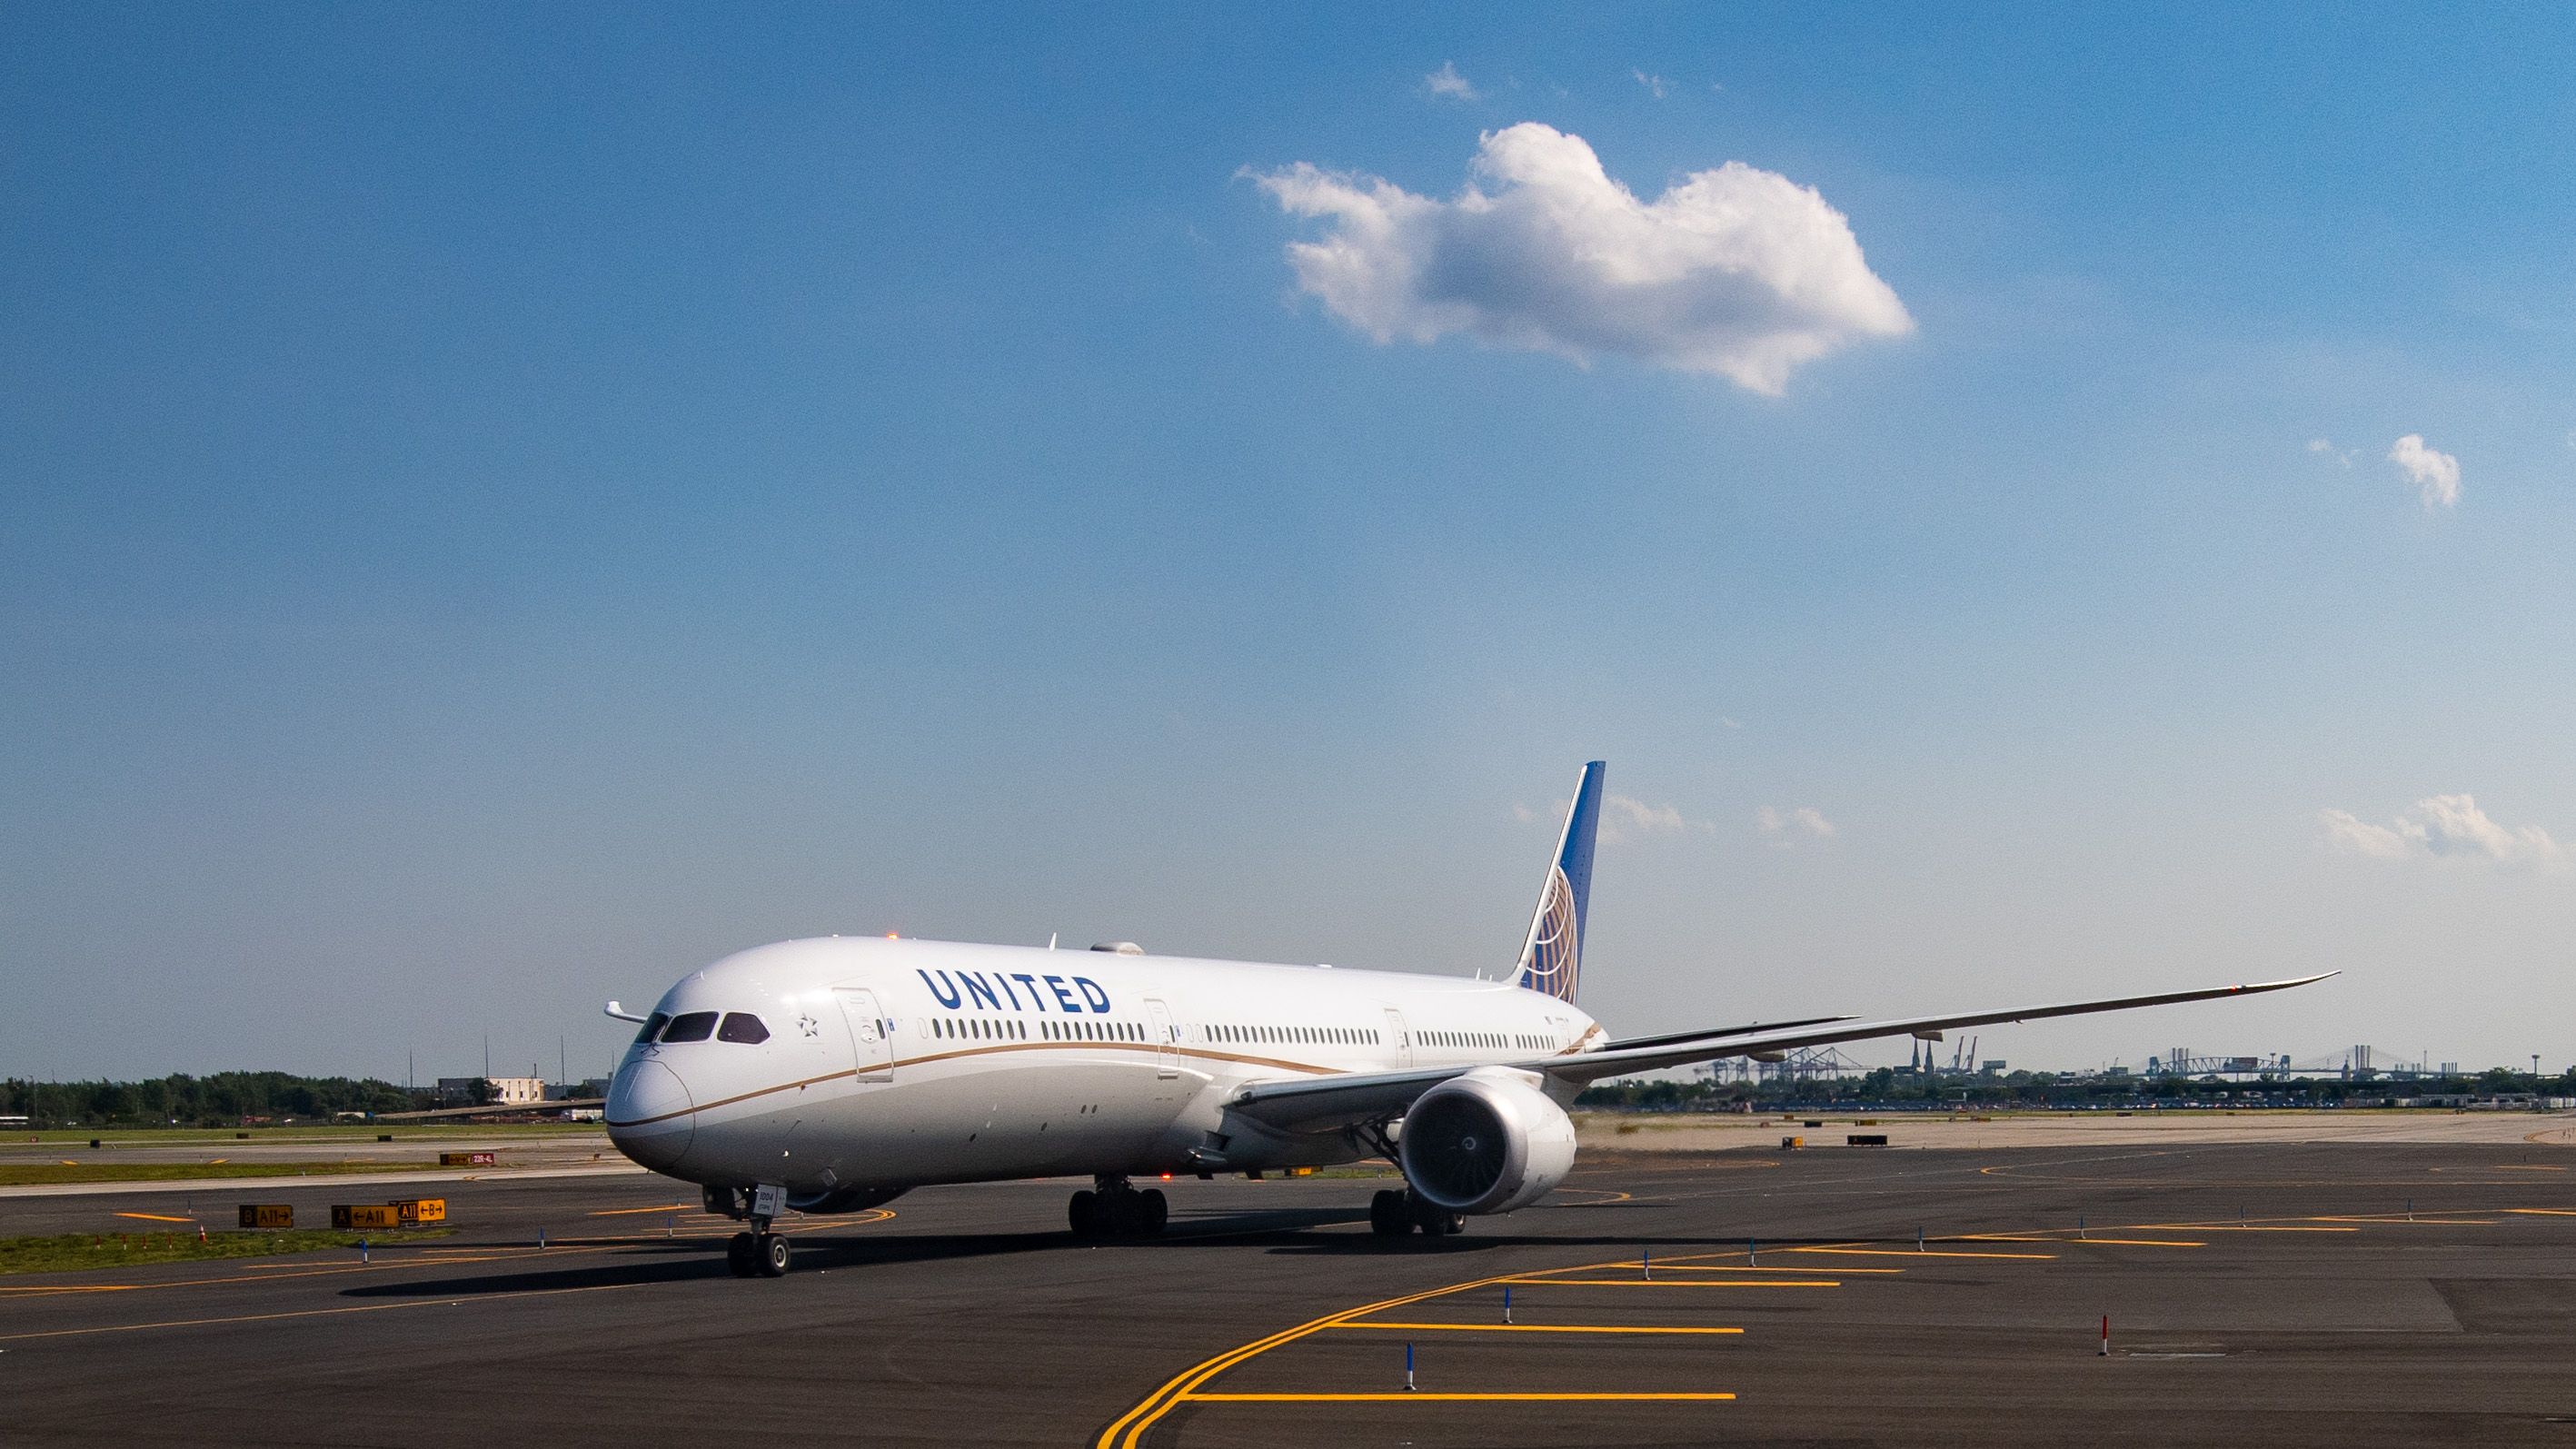 Full_Size_of_A United Airlines 787-10 Dreamliner on the Taxiway_01